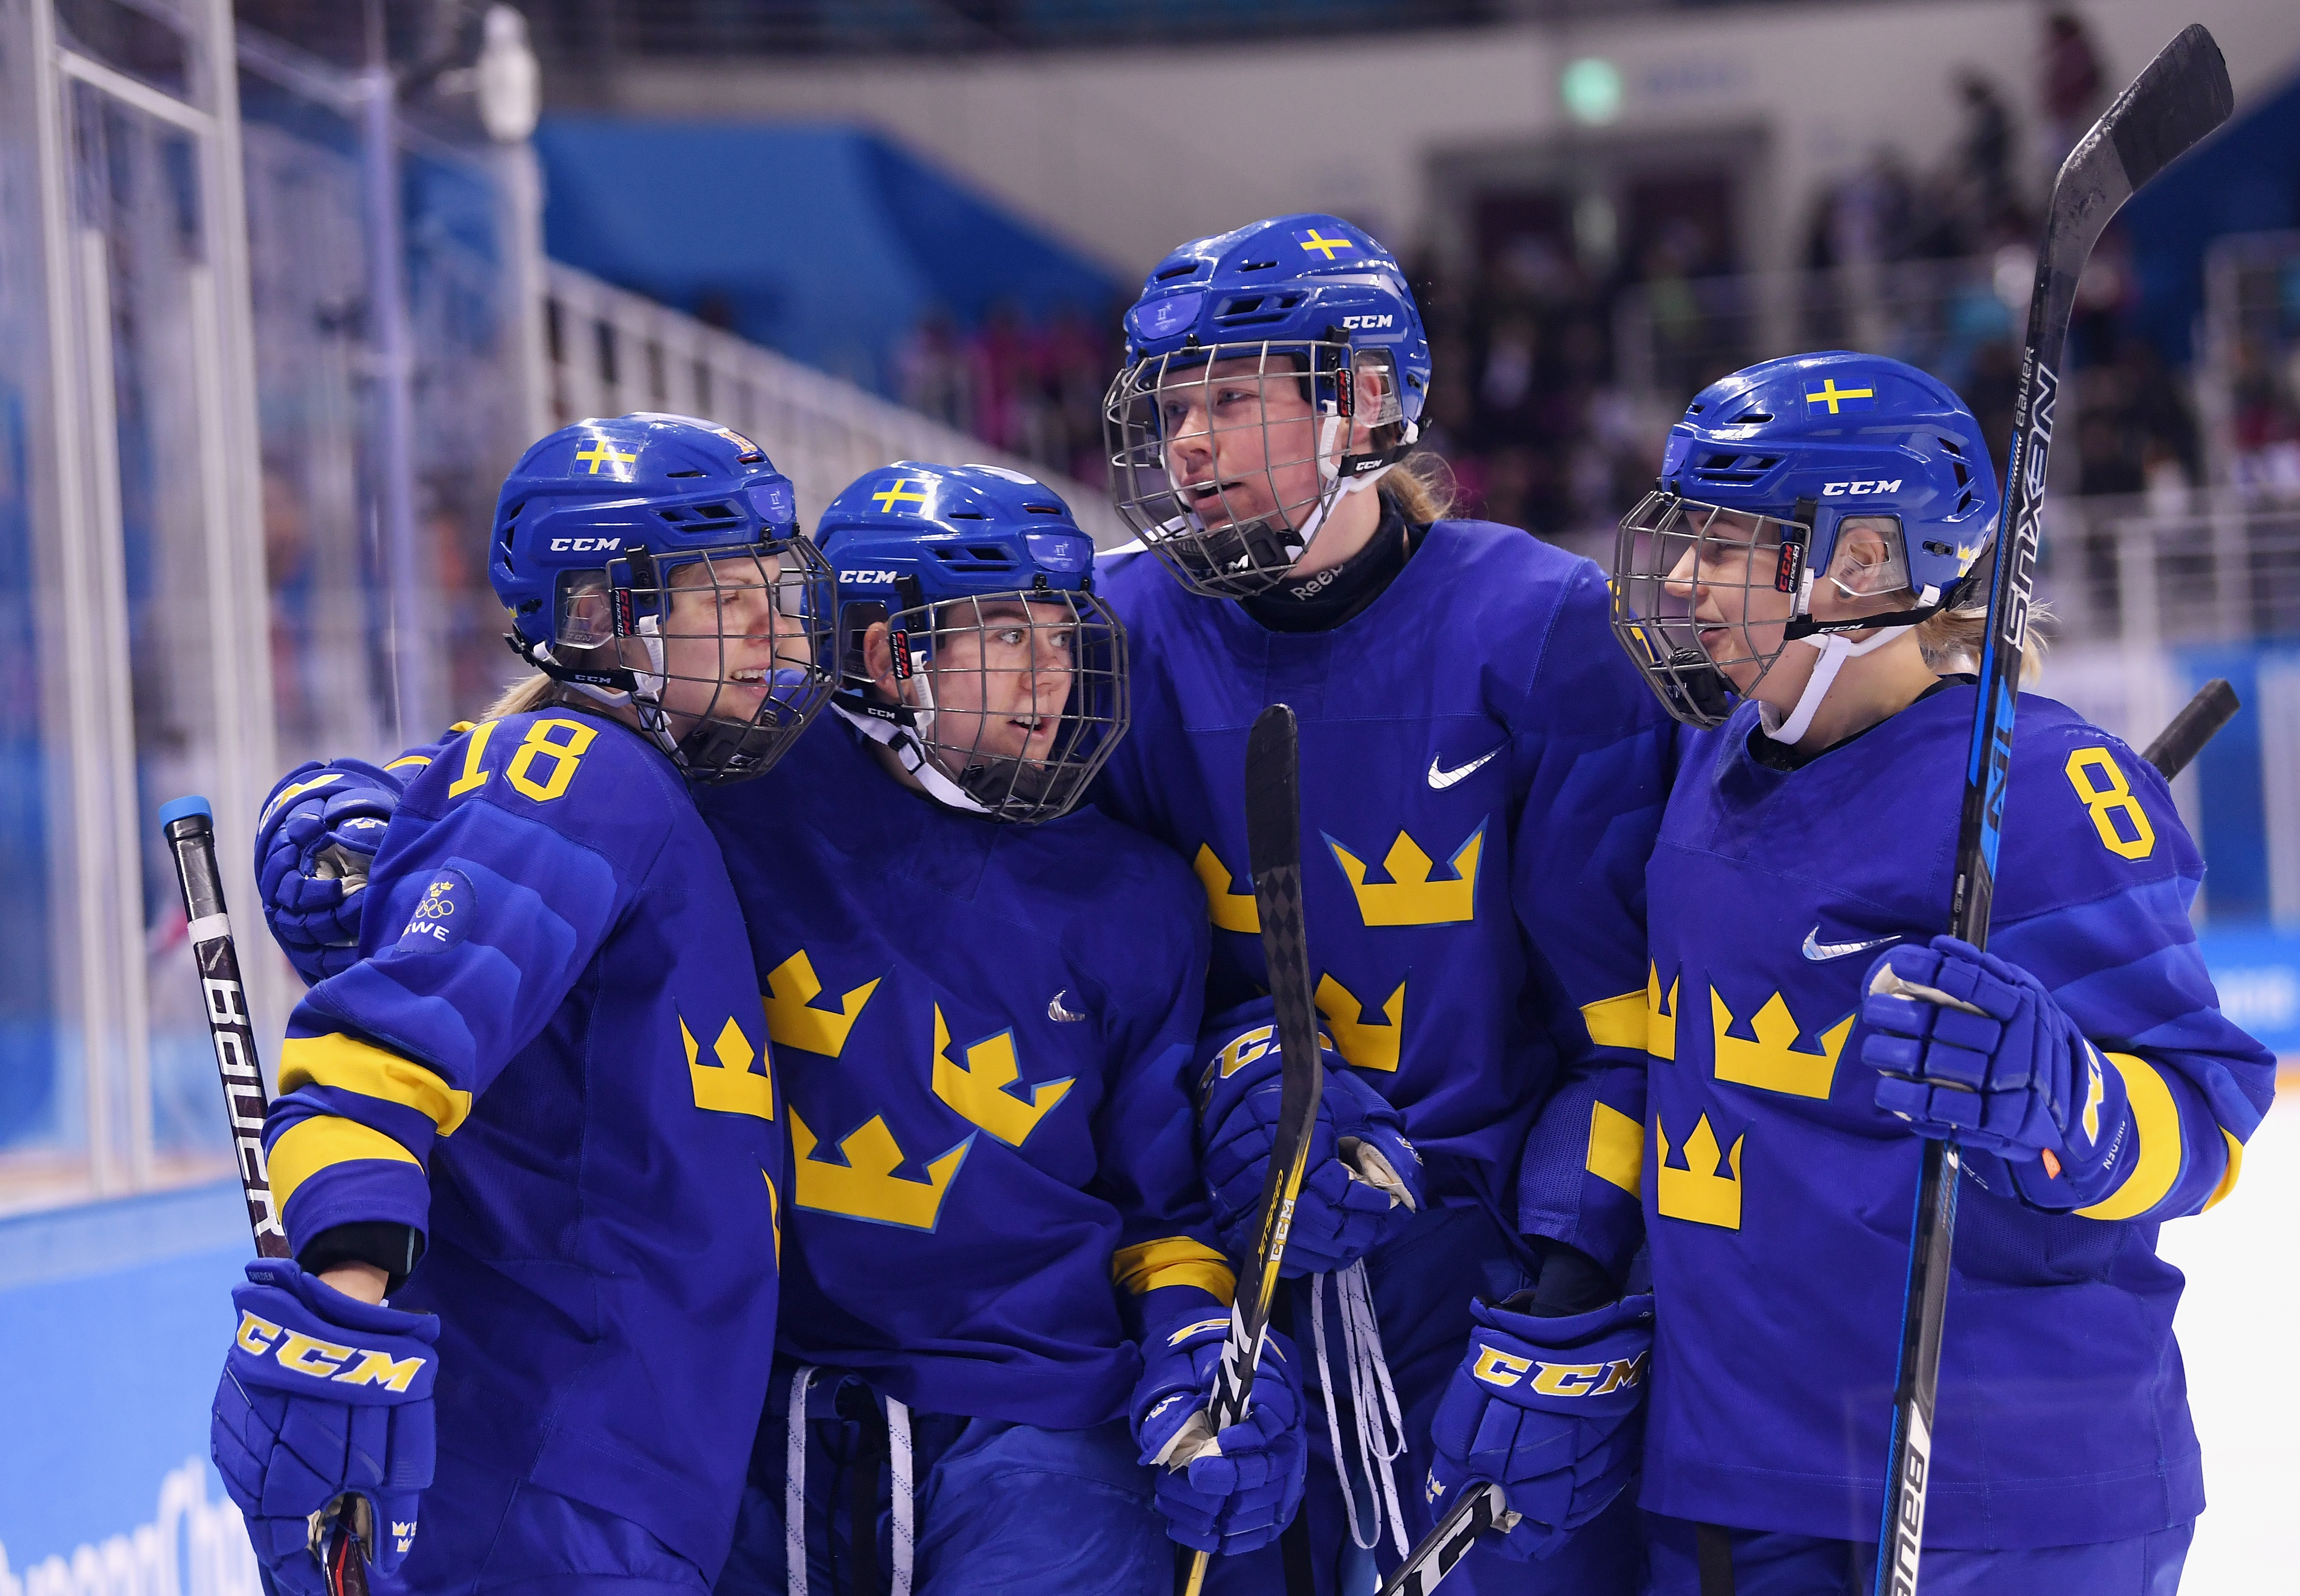 Lisa Johansson #15 of Sweden celebrates with teammates after scoring a third period goal against Korea at the PyeongChang 2018 Winter Olympic Games.